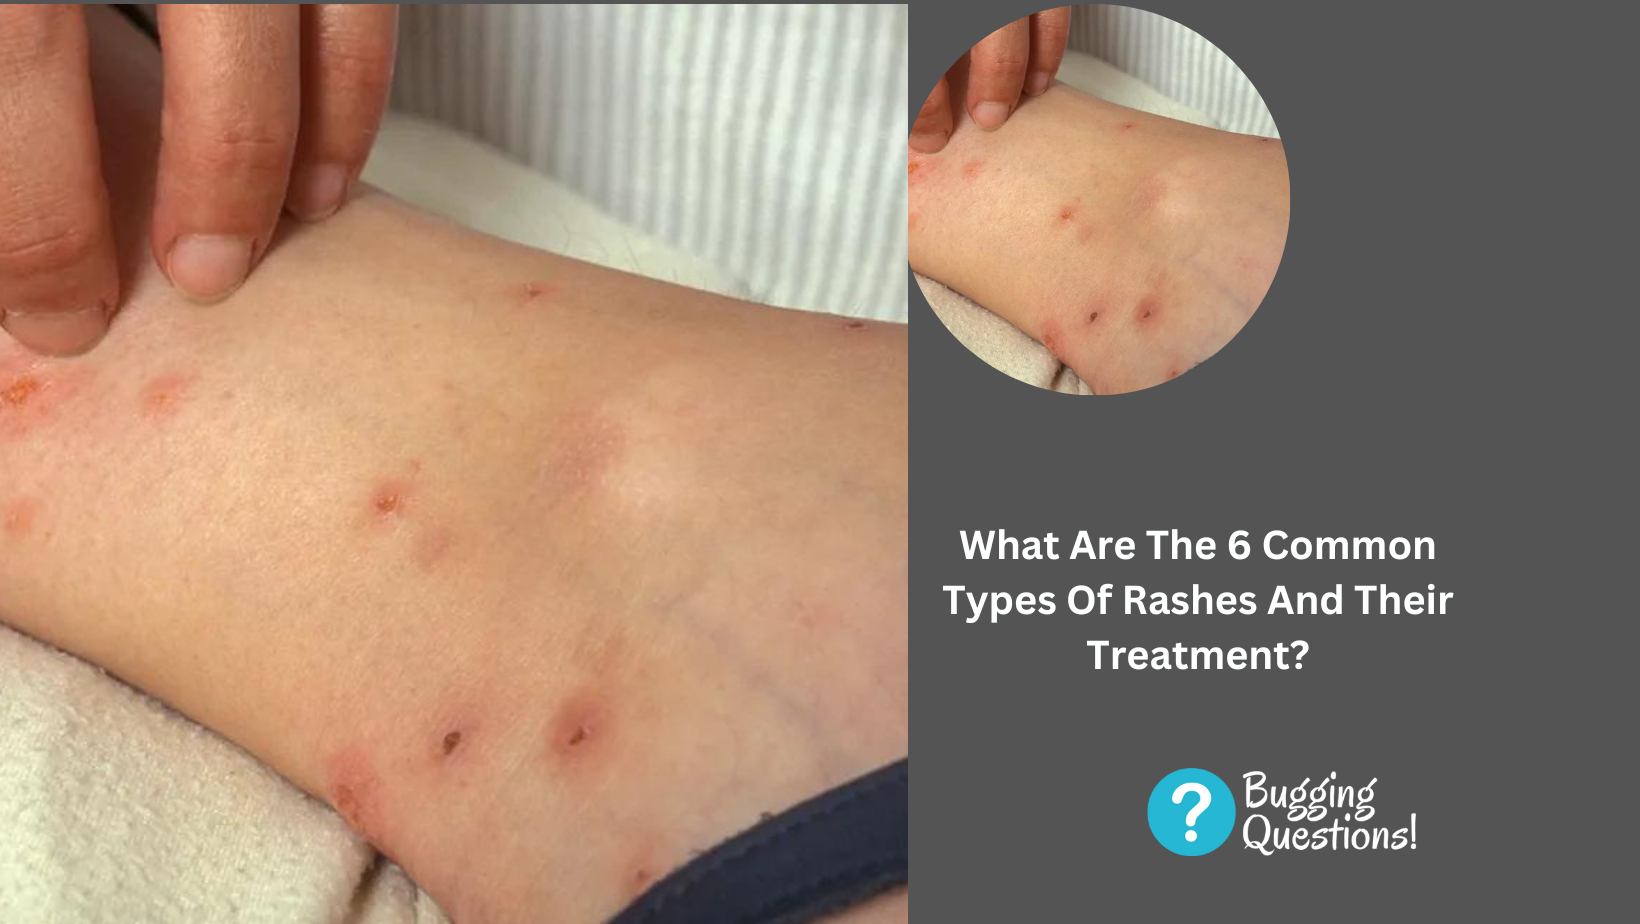 What Are The 6 Common Types Of Rashes And Their Treatment?